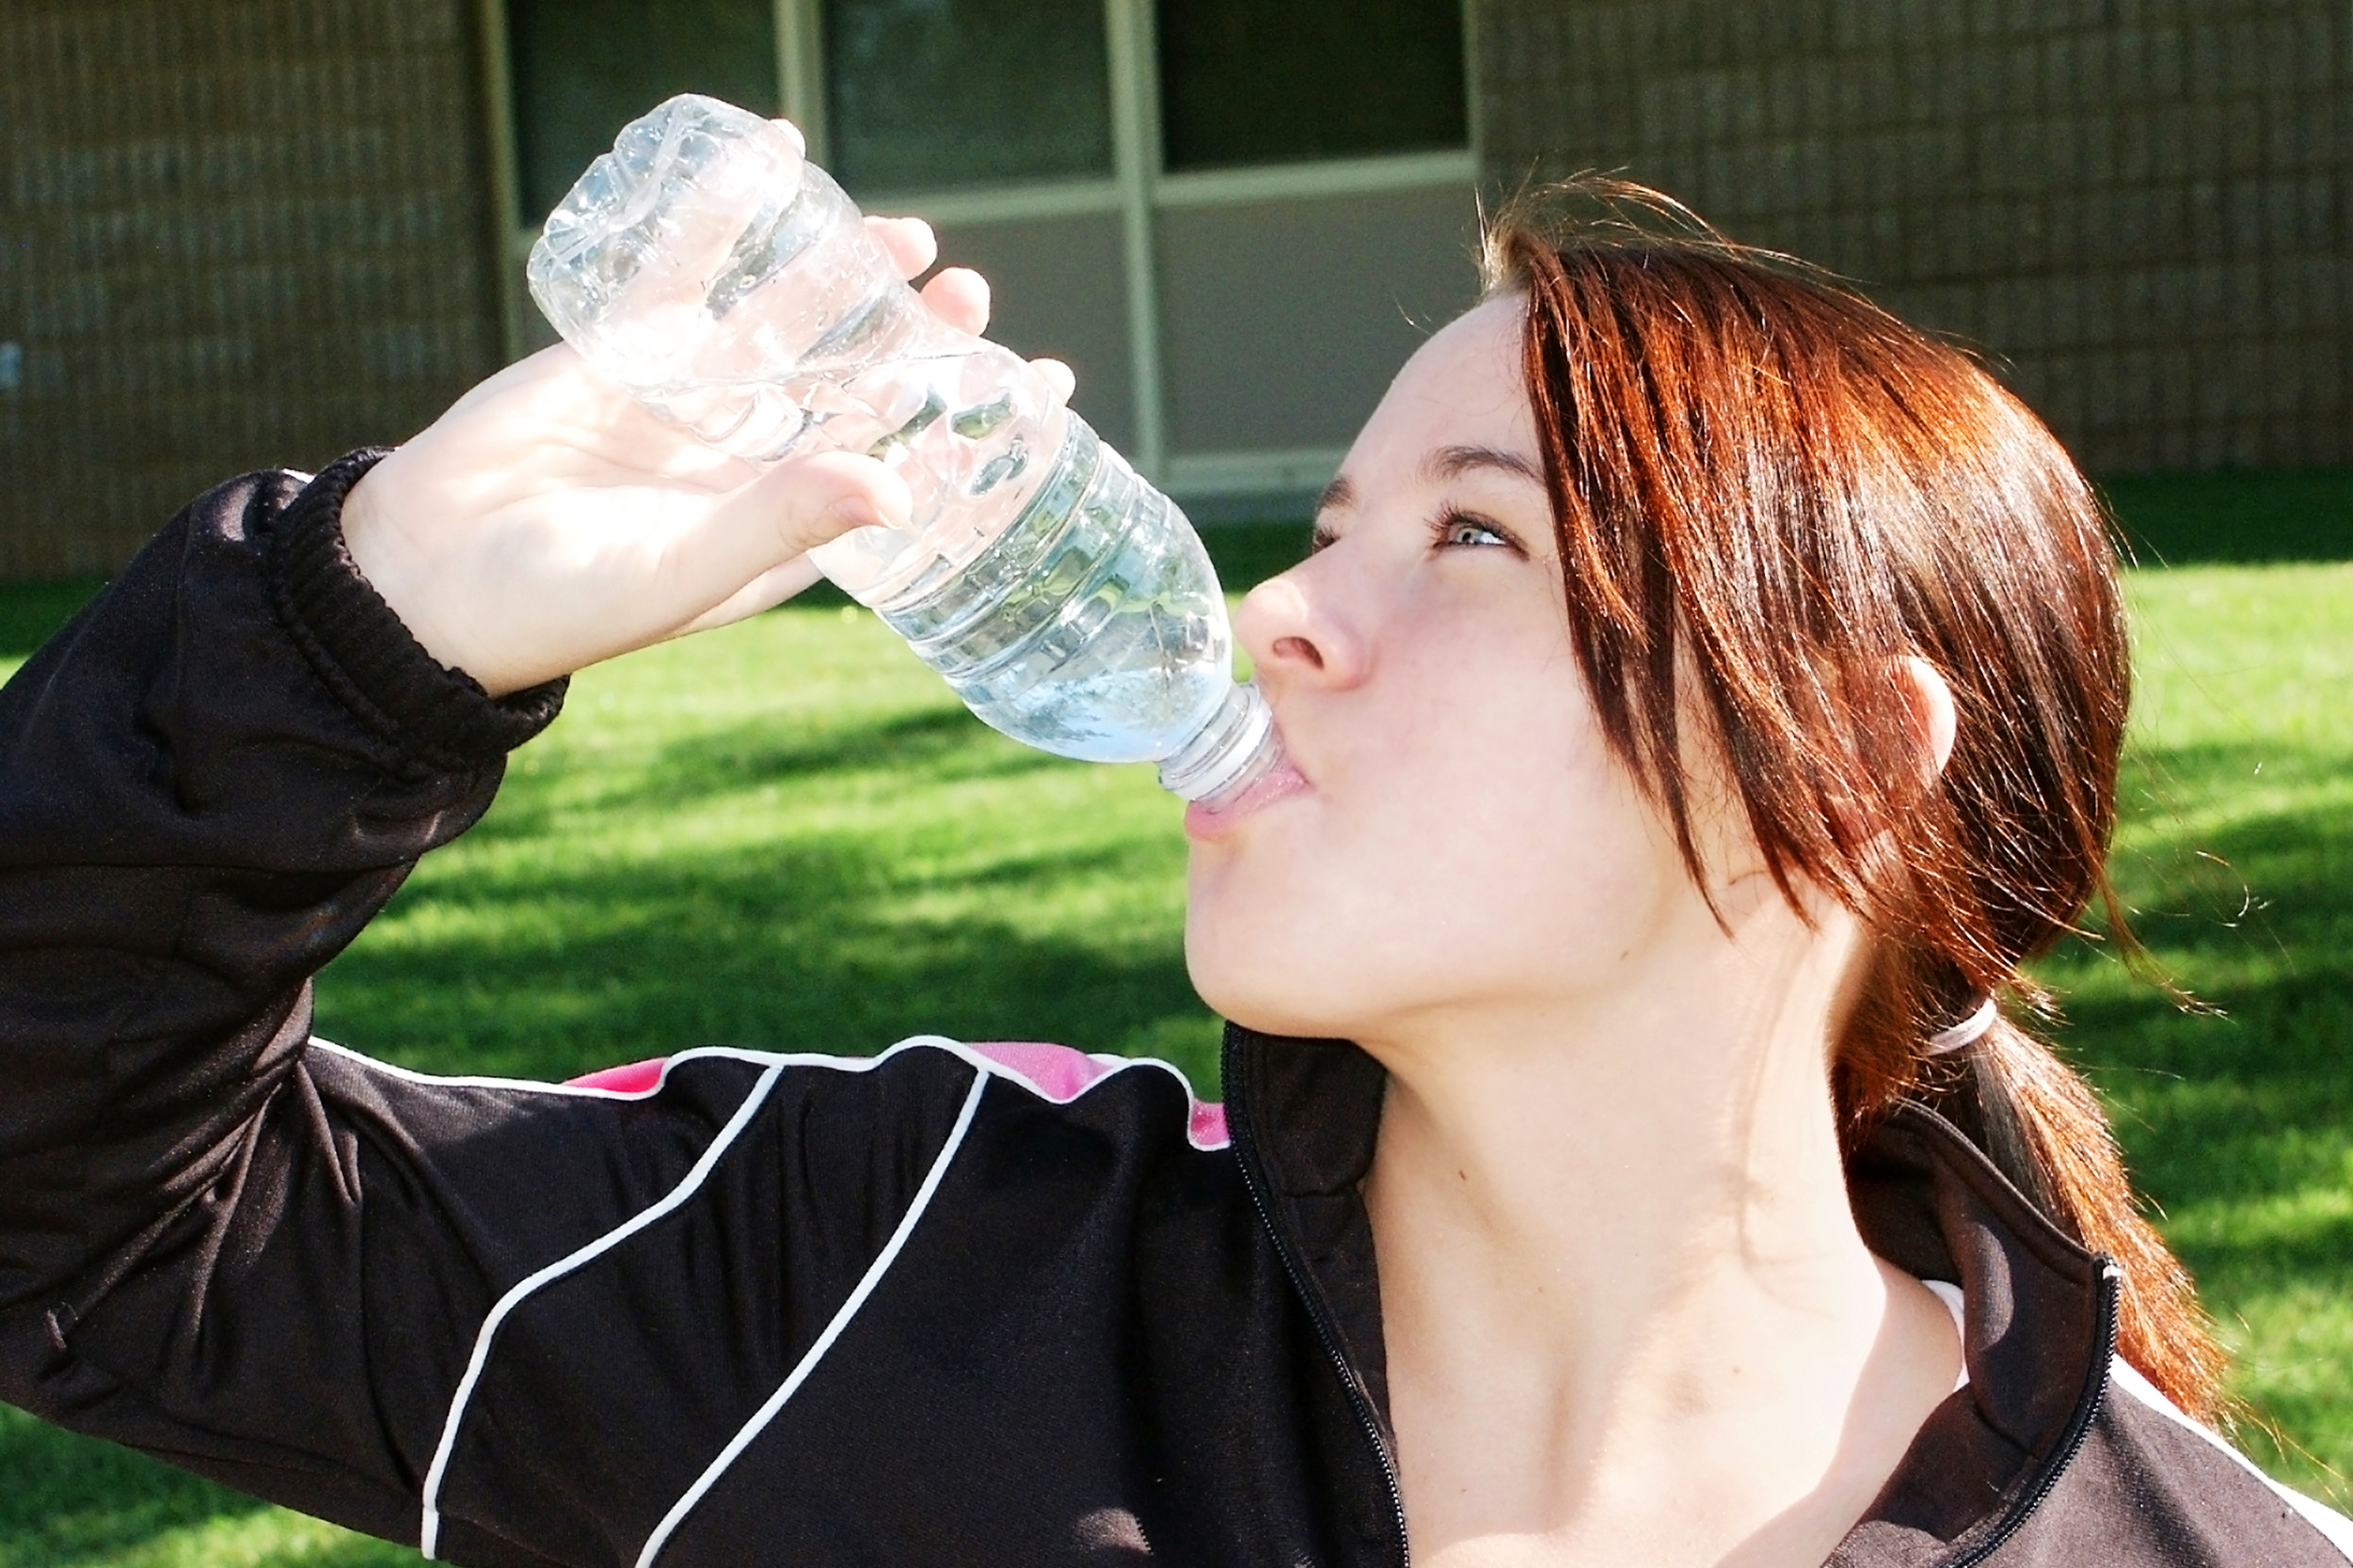 Girl drinking water, Active, Summer, Outside, People, HQ Photo